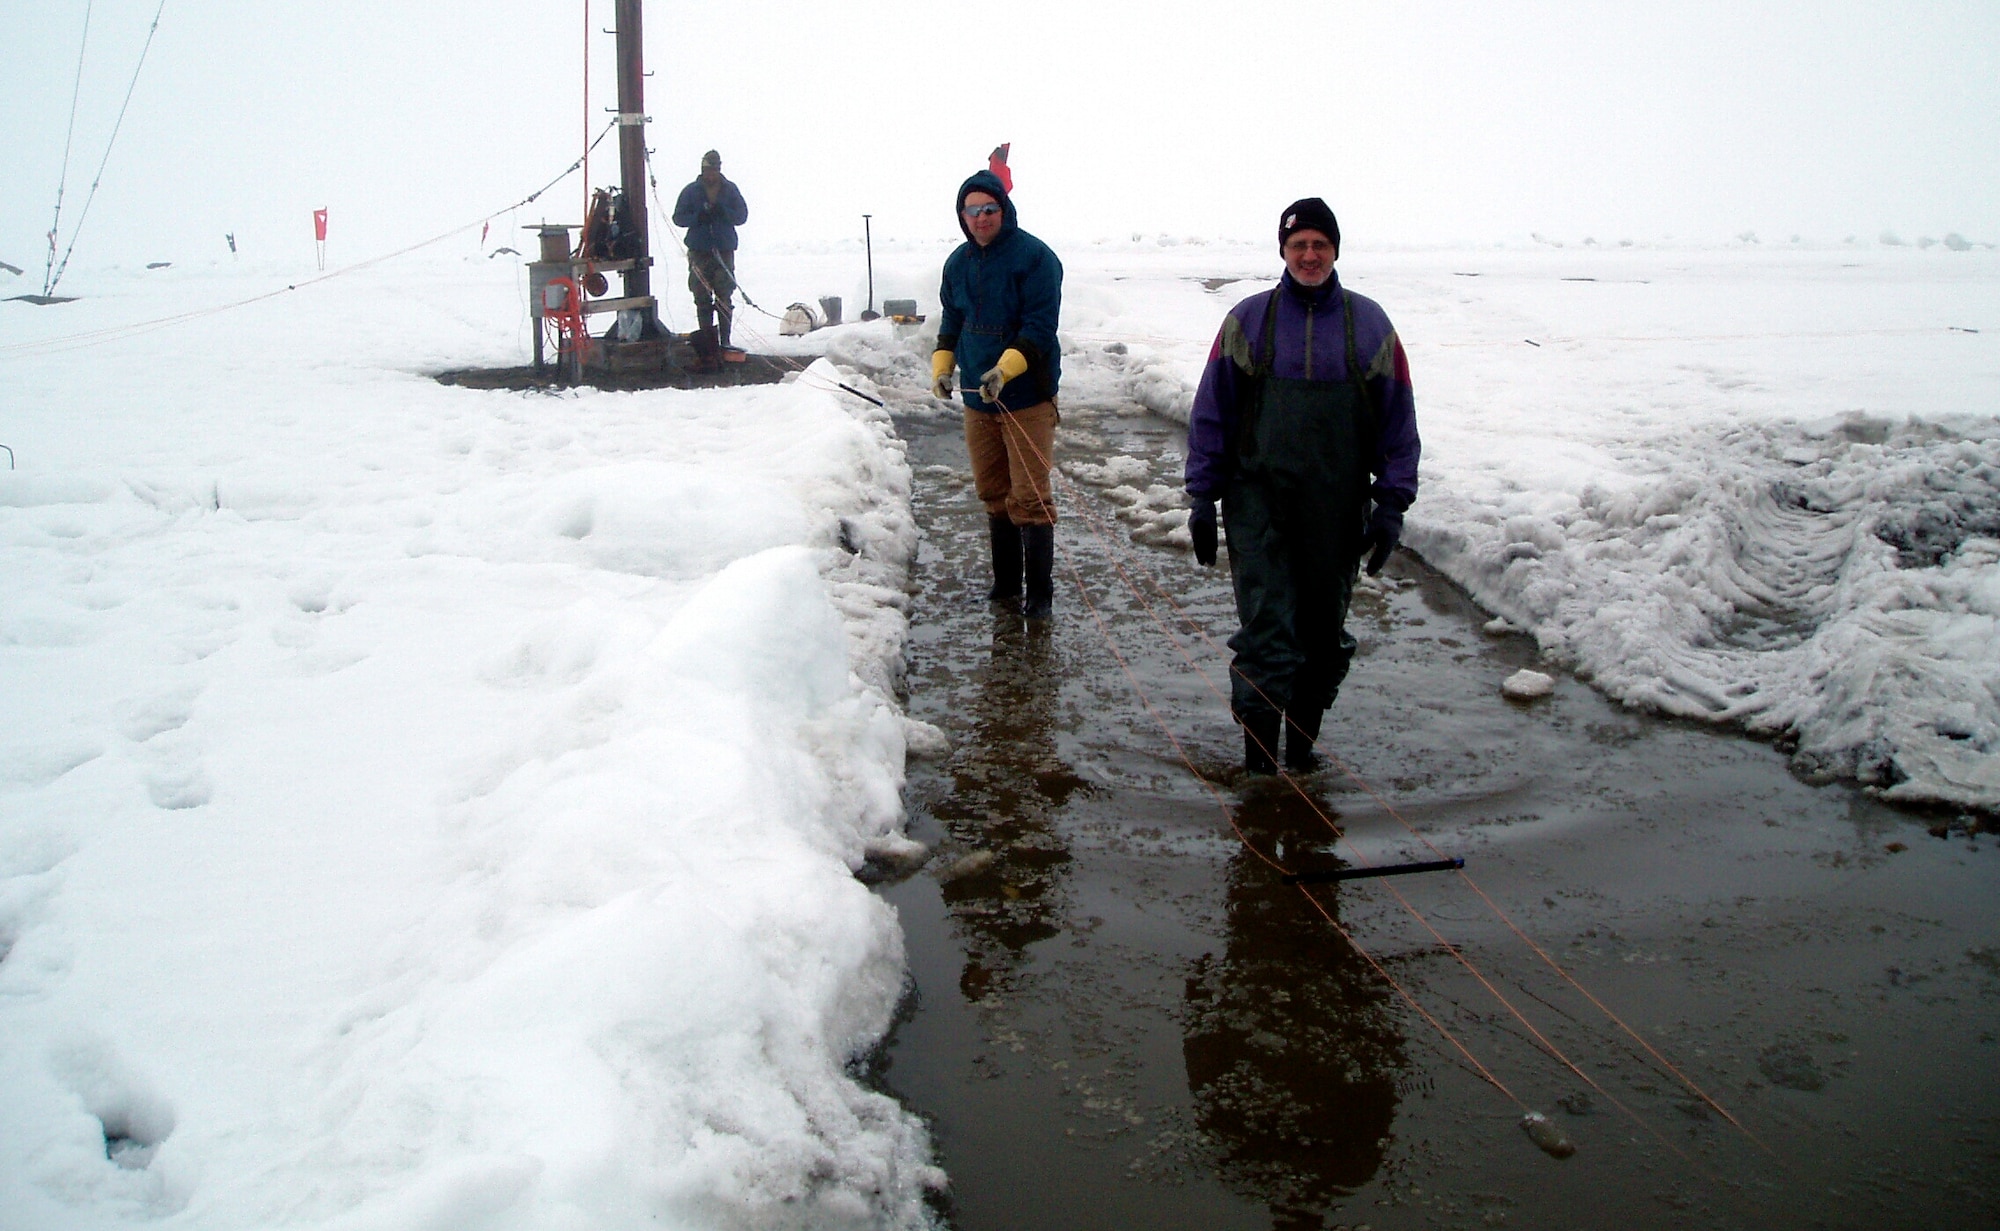 Second Lt. Isseyas Mengistu (rear), 1st Lt. Robert Esposito (middle) and Jake Quinn, lay out ionosonde antenna elements on the frozen tundra at Station Nord, Greenland, prior to hoisting them up an 82-foot pole. The men, researchers with the Air Force Research Laboratory's Space Vehicles Directorate, are part of a team working to improve the capability to predict ionosphere-created disturbances in the atmosphere. (U.S. Air Force photo)